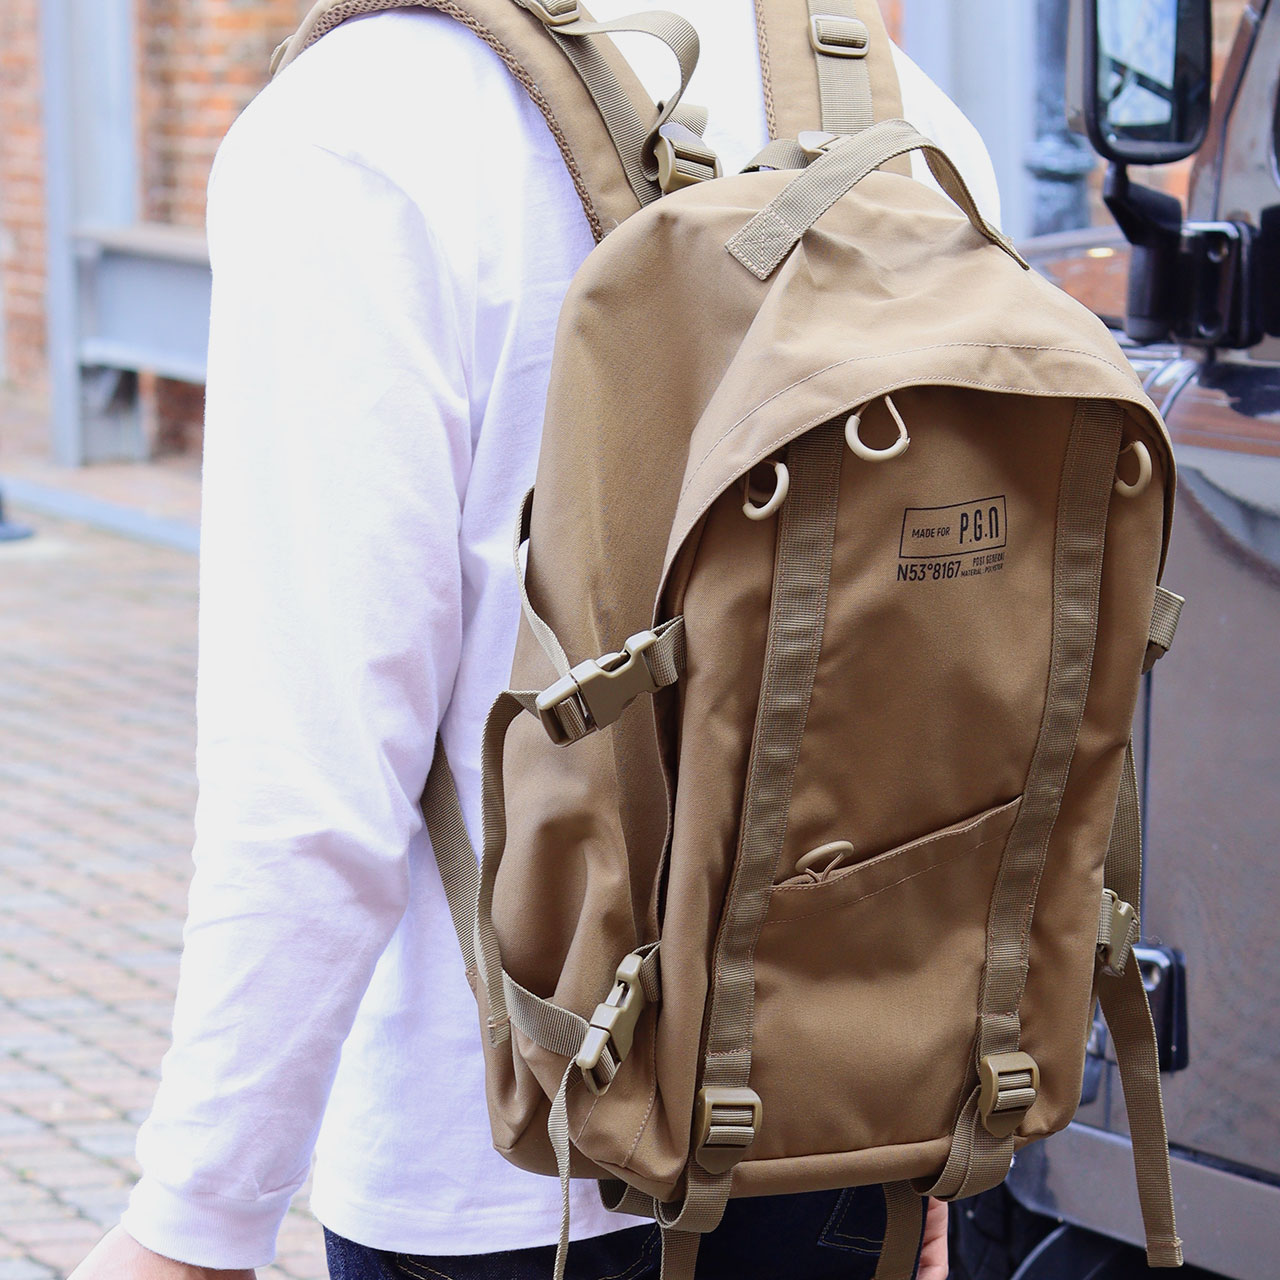 BACKPACK model 907 / バックパック モデル907 - WOLF BROWN 